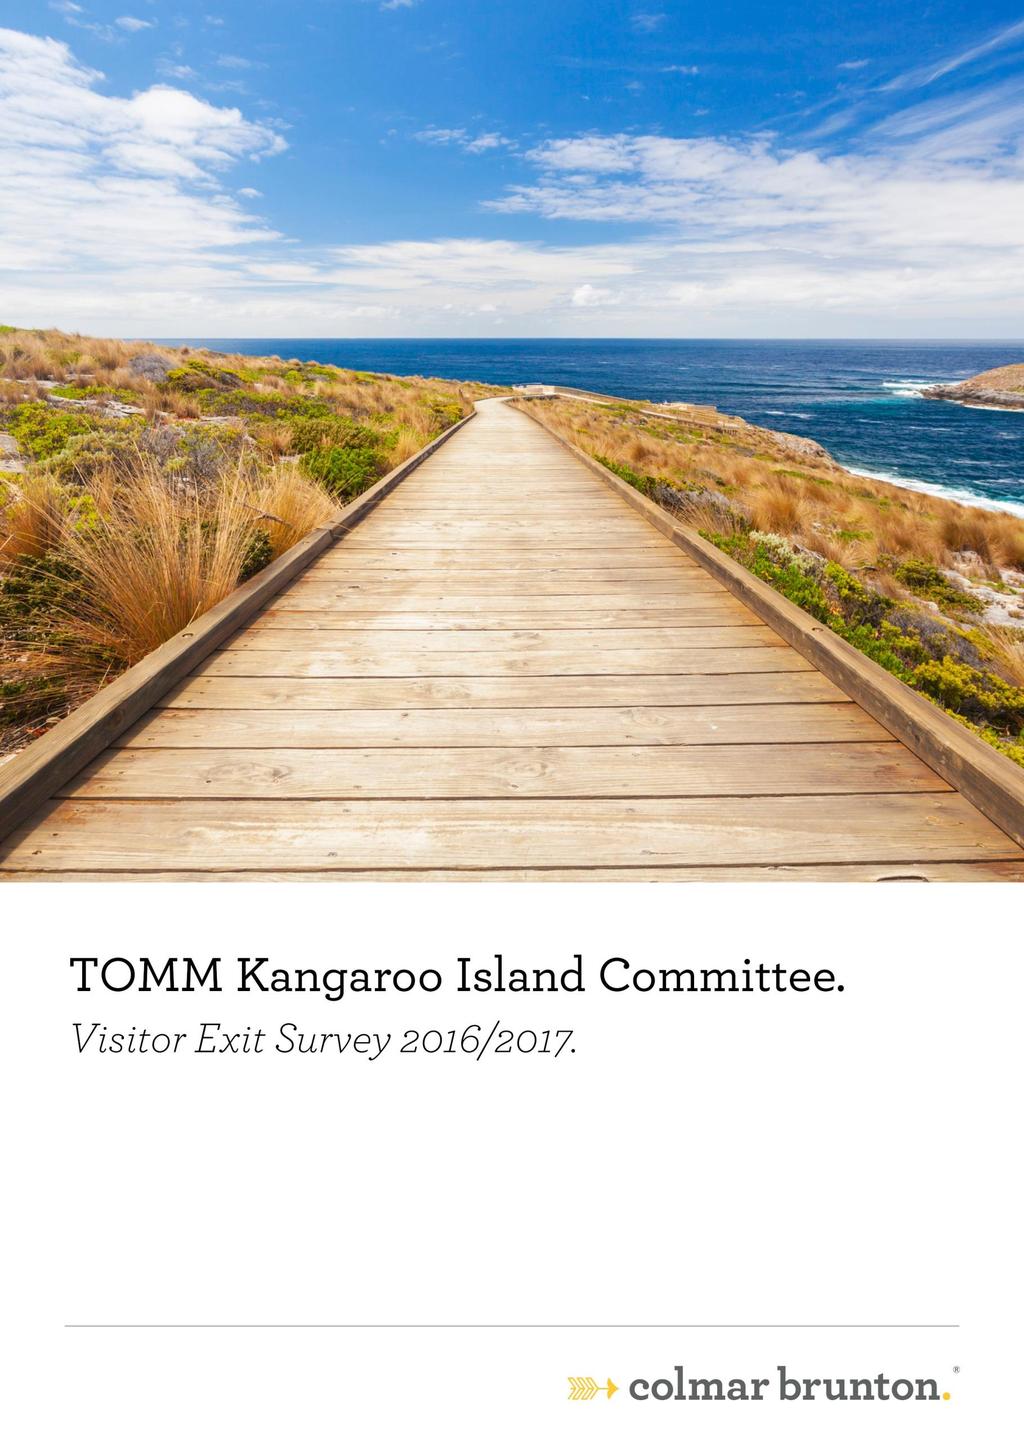 Prepared for: TOMM Committee Kangaroo Island CB Contact: Ben Nitschke, Account Manager Phone: (08) 8373 3822